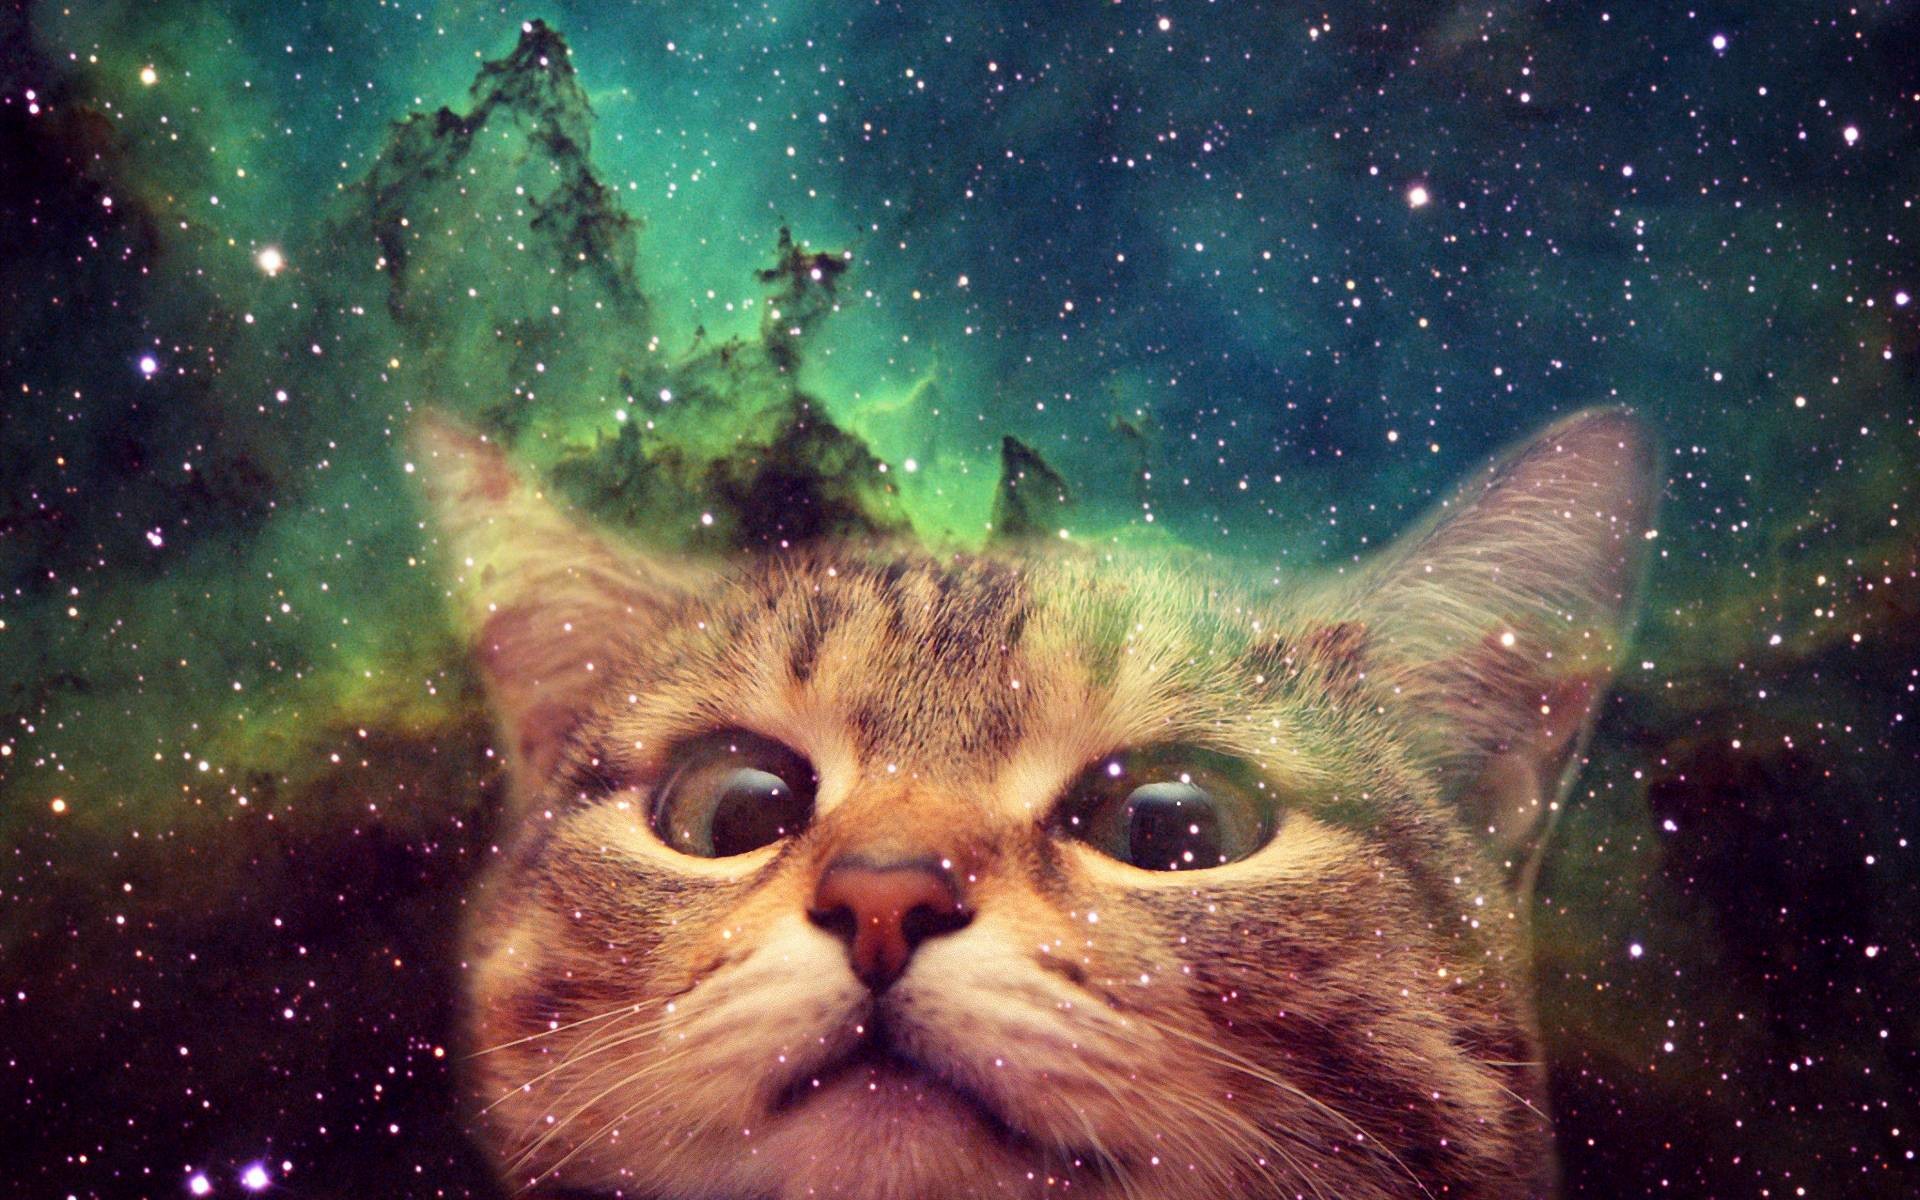 Space cat wallpaper backgrounds photos images pictures â yl computing